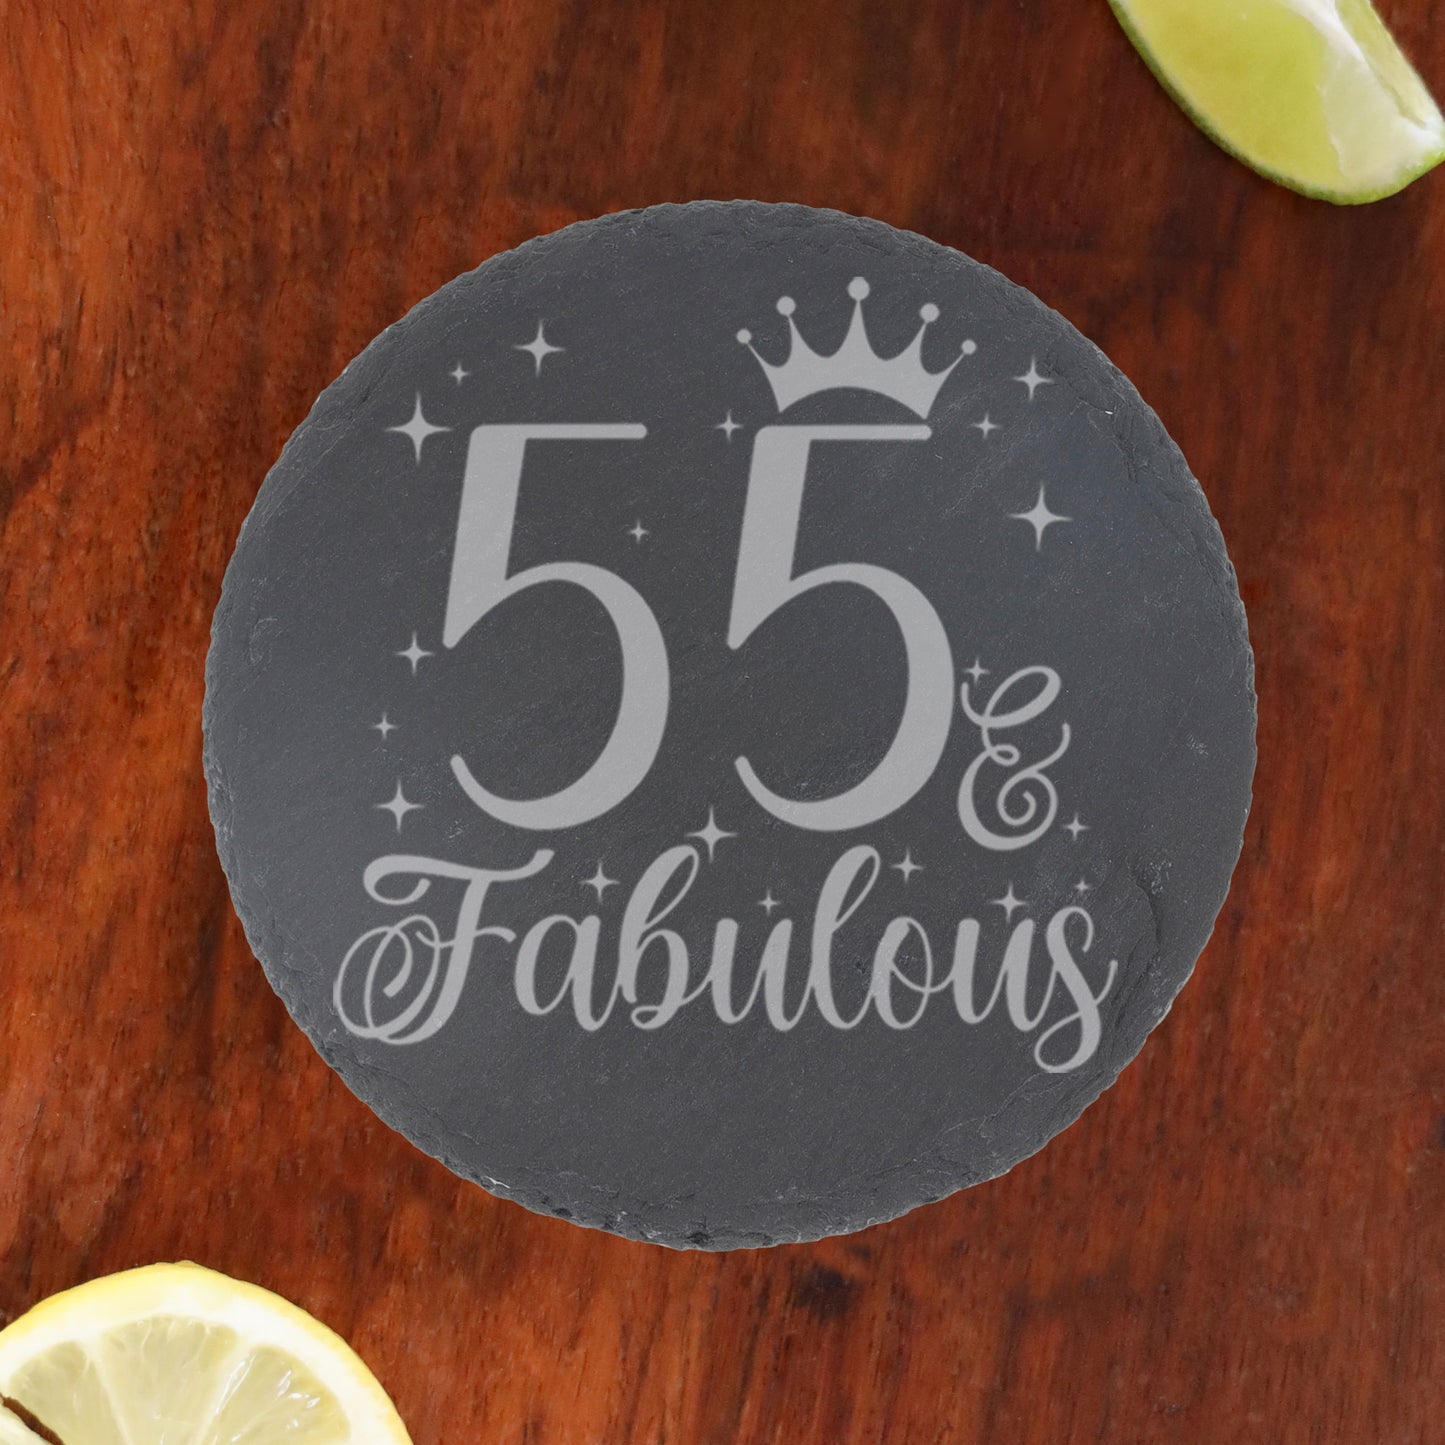 55 & Fabulous 55th Birthday Gift Engraved Wine Glass and/or Coaster Set  - Always Looking Good - Round Coaster Only  